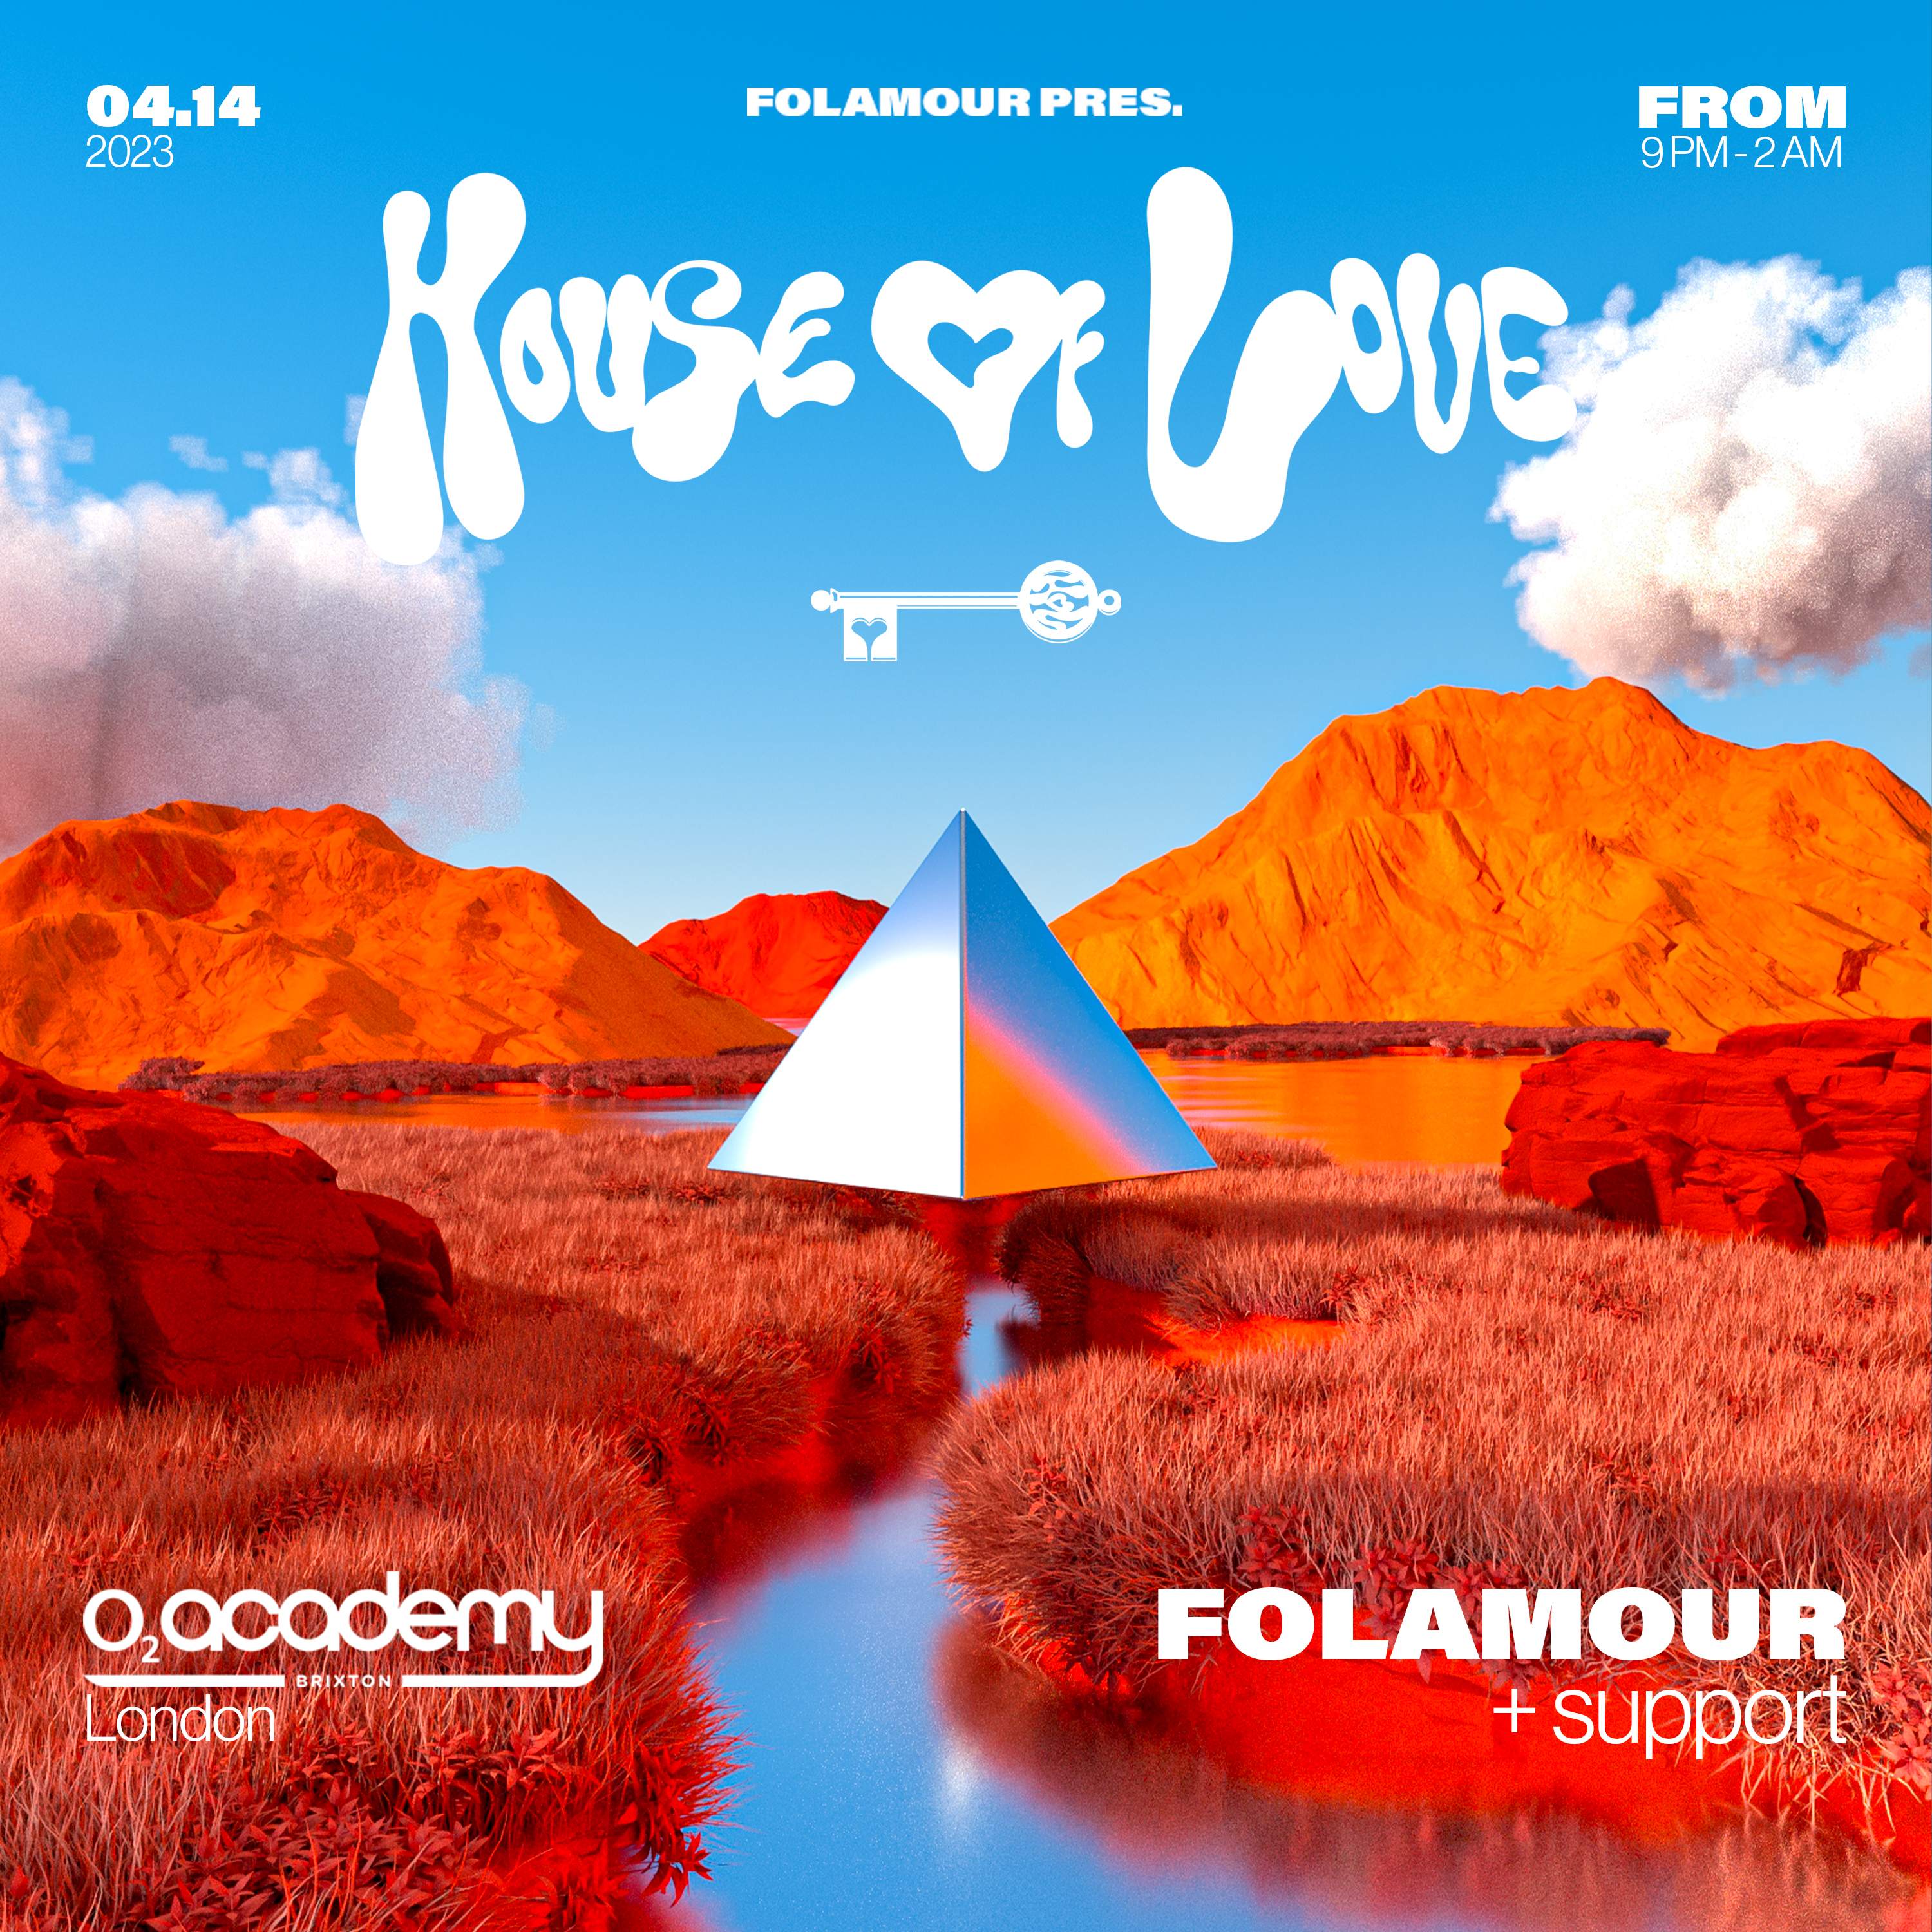 Folamour: House of Love A/V (RESCHEDULED) - Página trasera